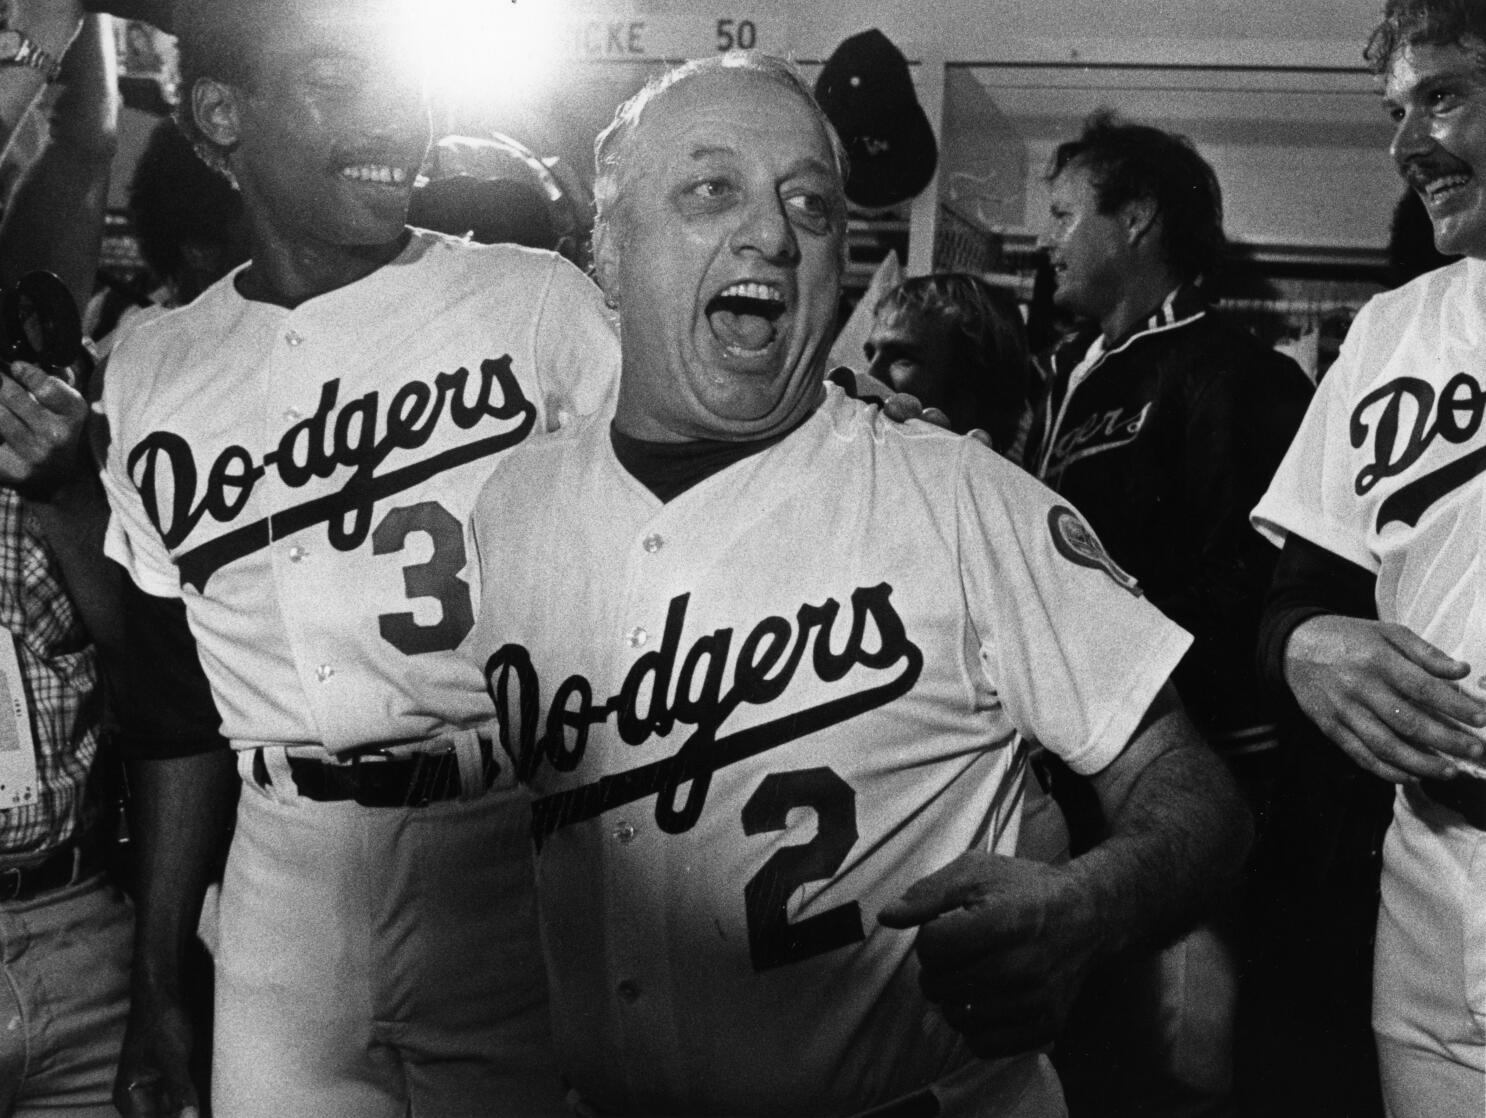 Plaschke: Tommy Lasorda loved the Dodgers so much, he became the